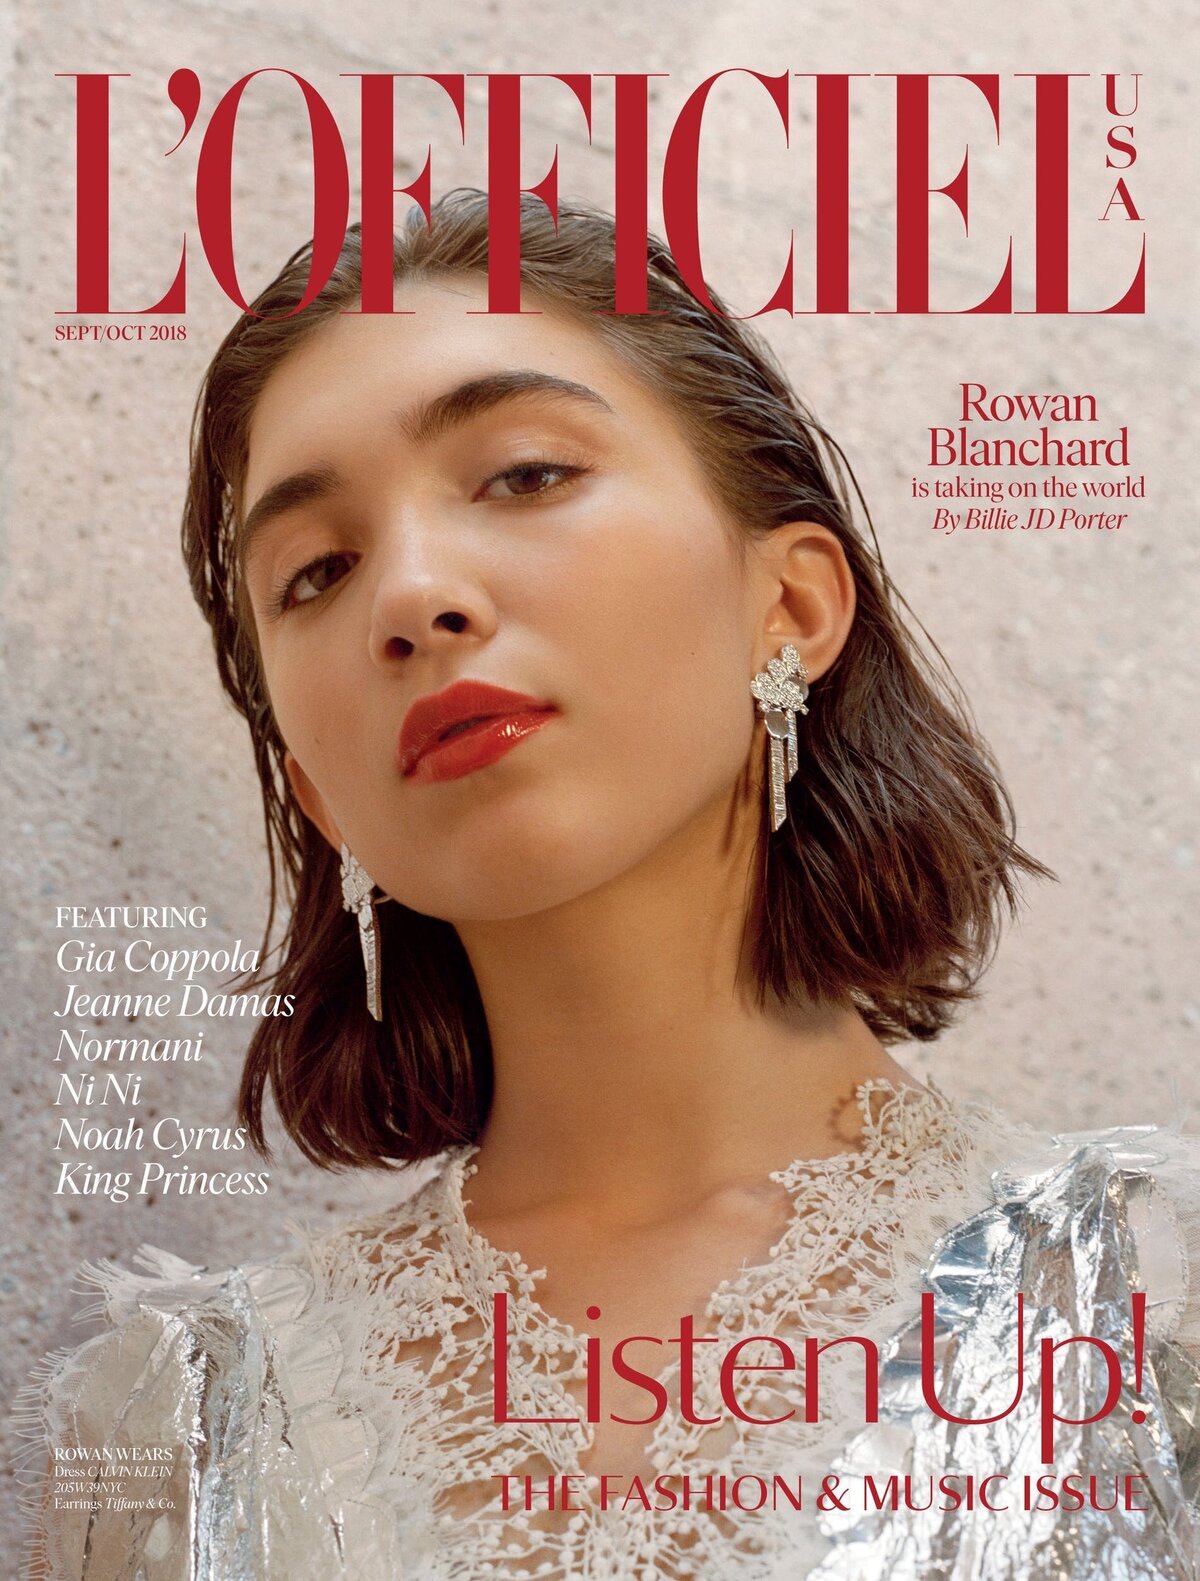 Rowan Blanchard  on the cover of L'Officiel magazine